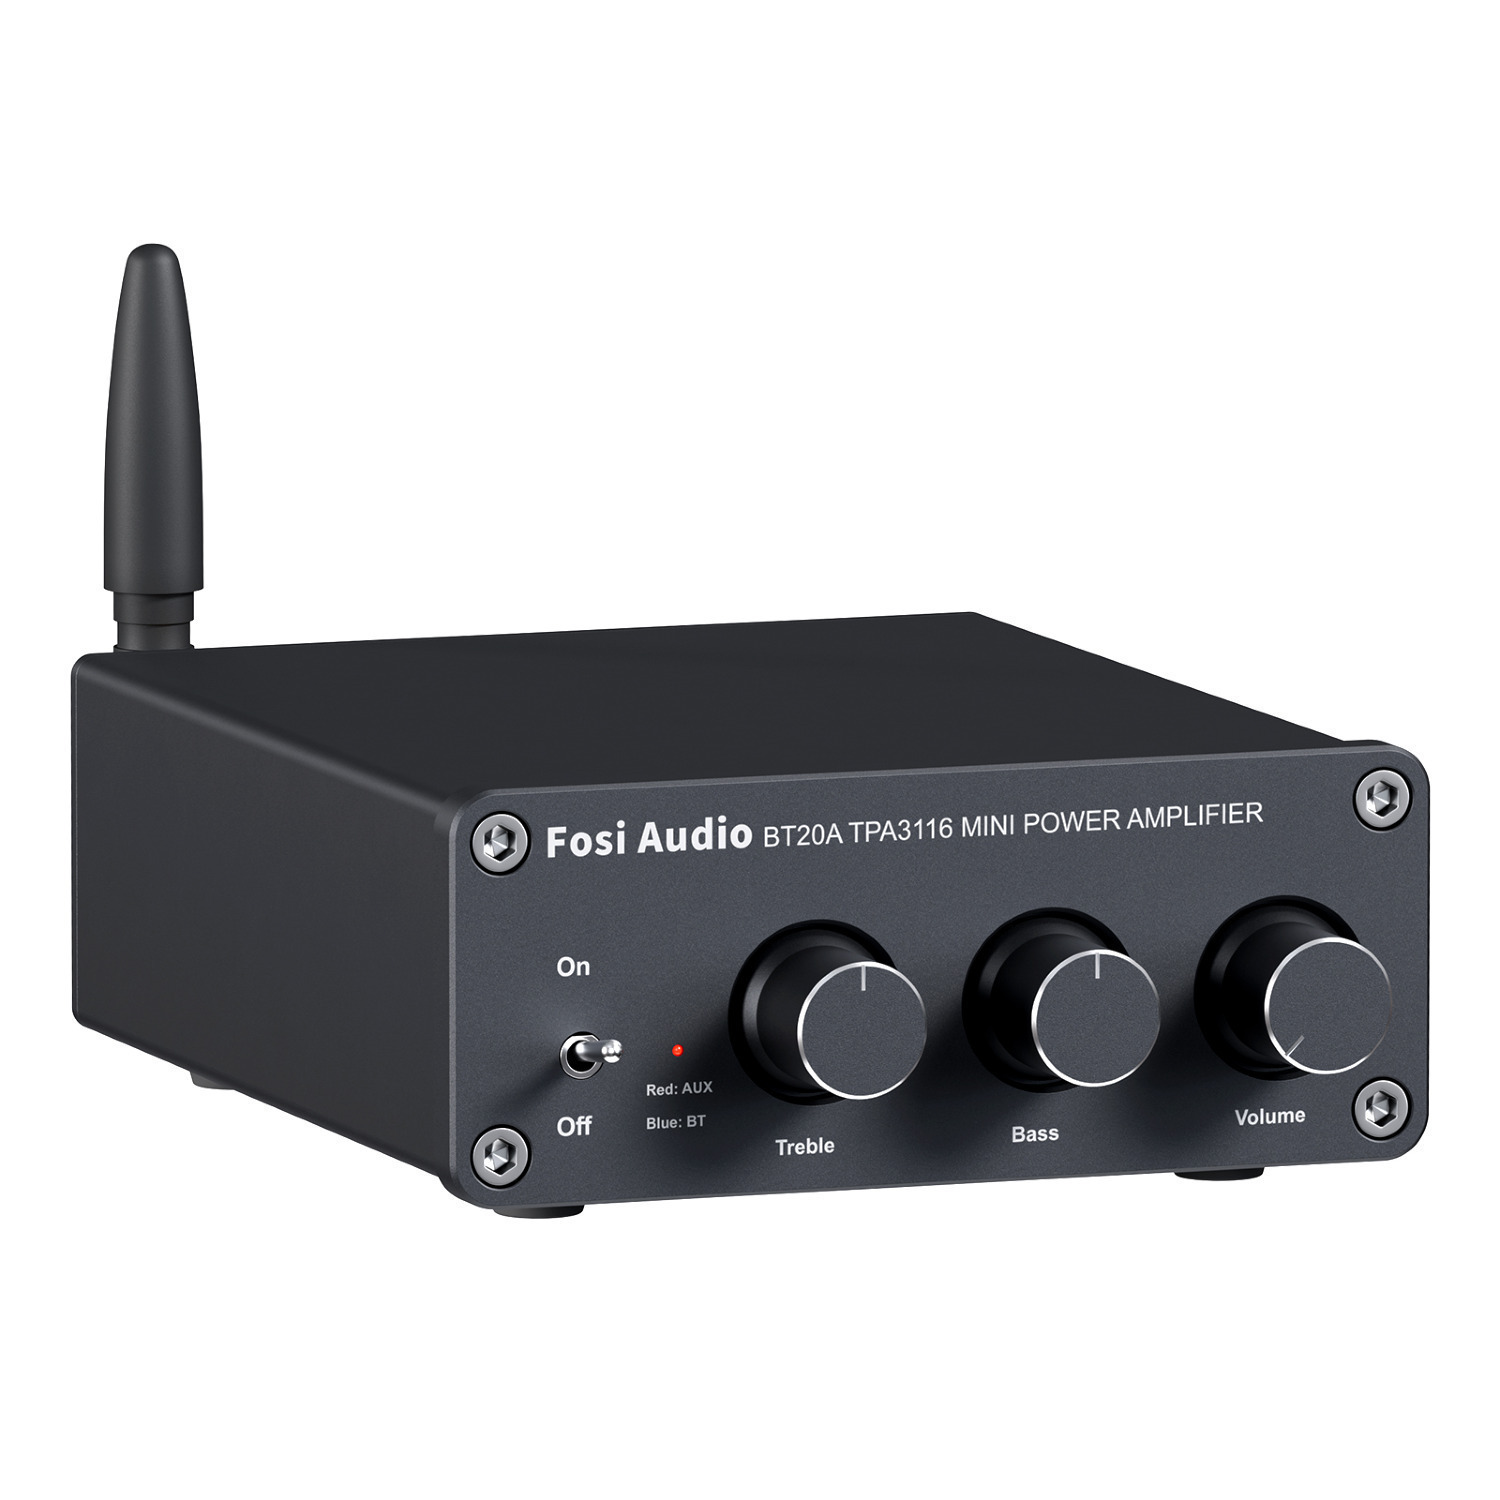 Fosi Audio BT20A Bluetooth 5.0 Stereo 2-Channel Amplifier Receiver $50 + Free Shipping